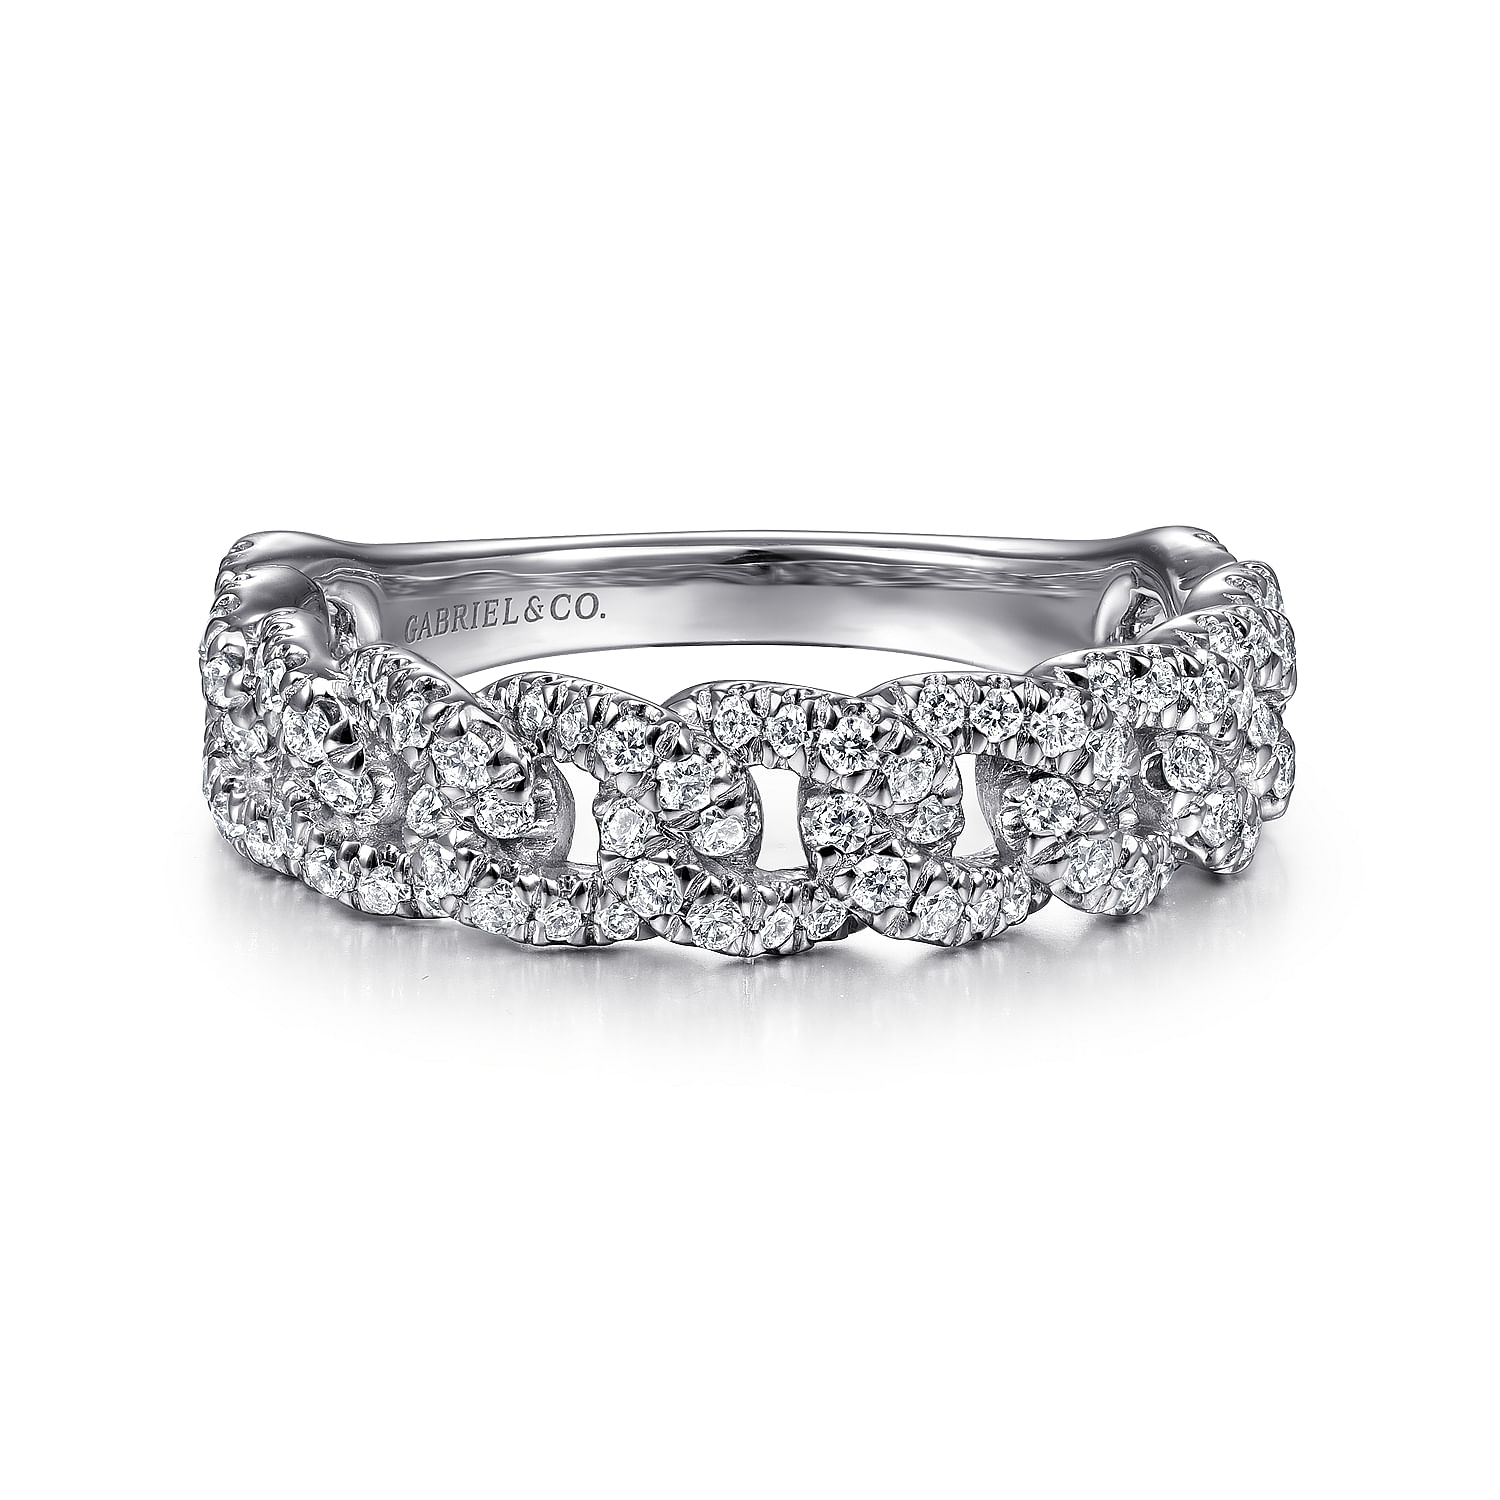 14K-White-Gold-Chain-Link-Stackable-Diamond-Ring1